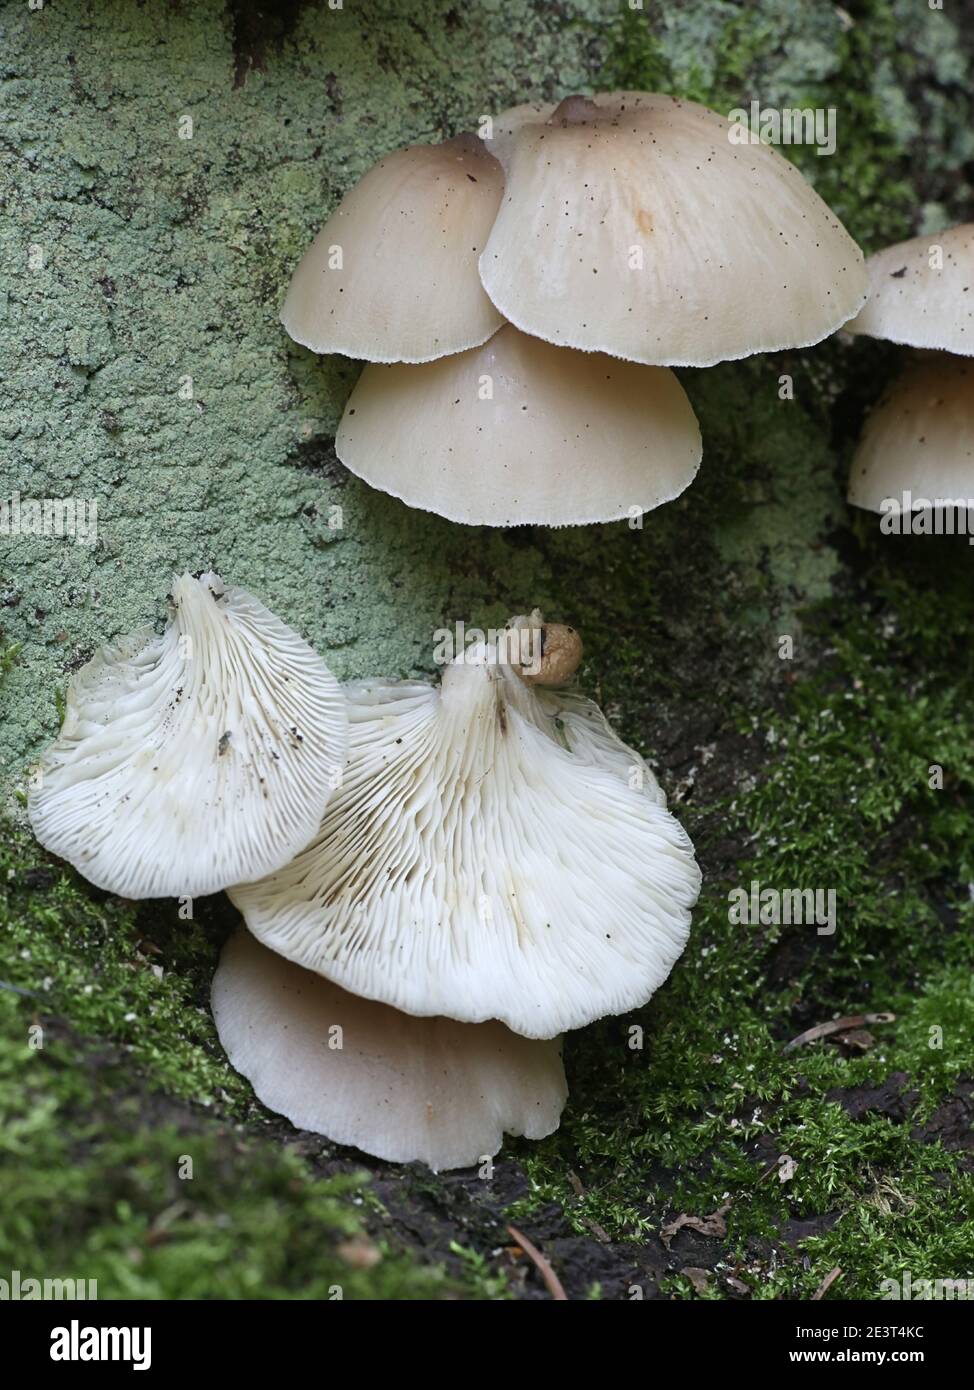 crepidotus applanatus, known as flat oysterling or flat crep, wild mushroom from Finland Stock Photo